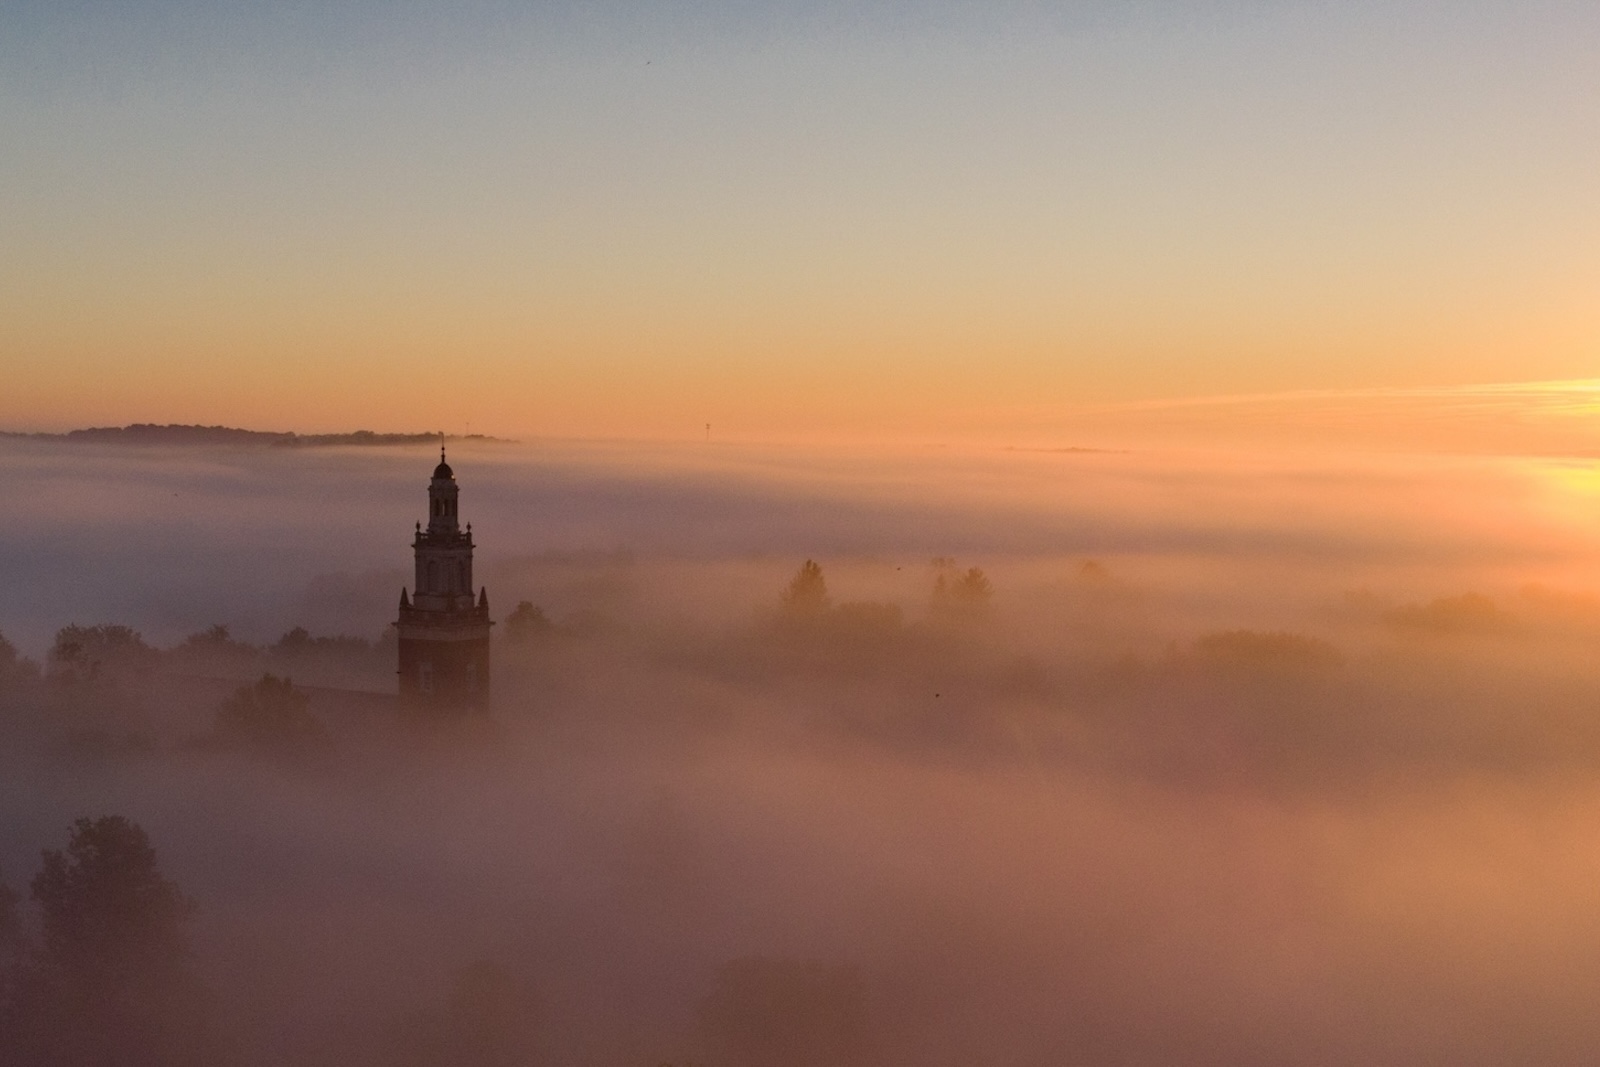 Swasey Chapel peaks out of the morning fog